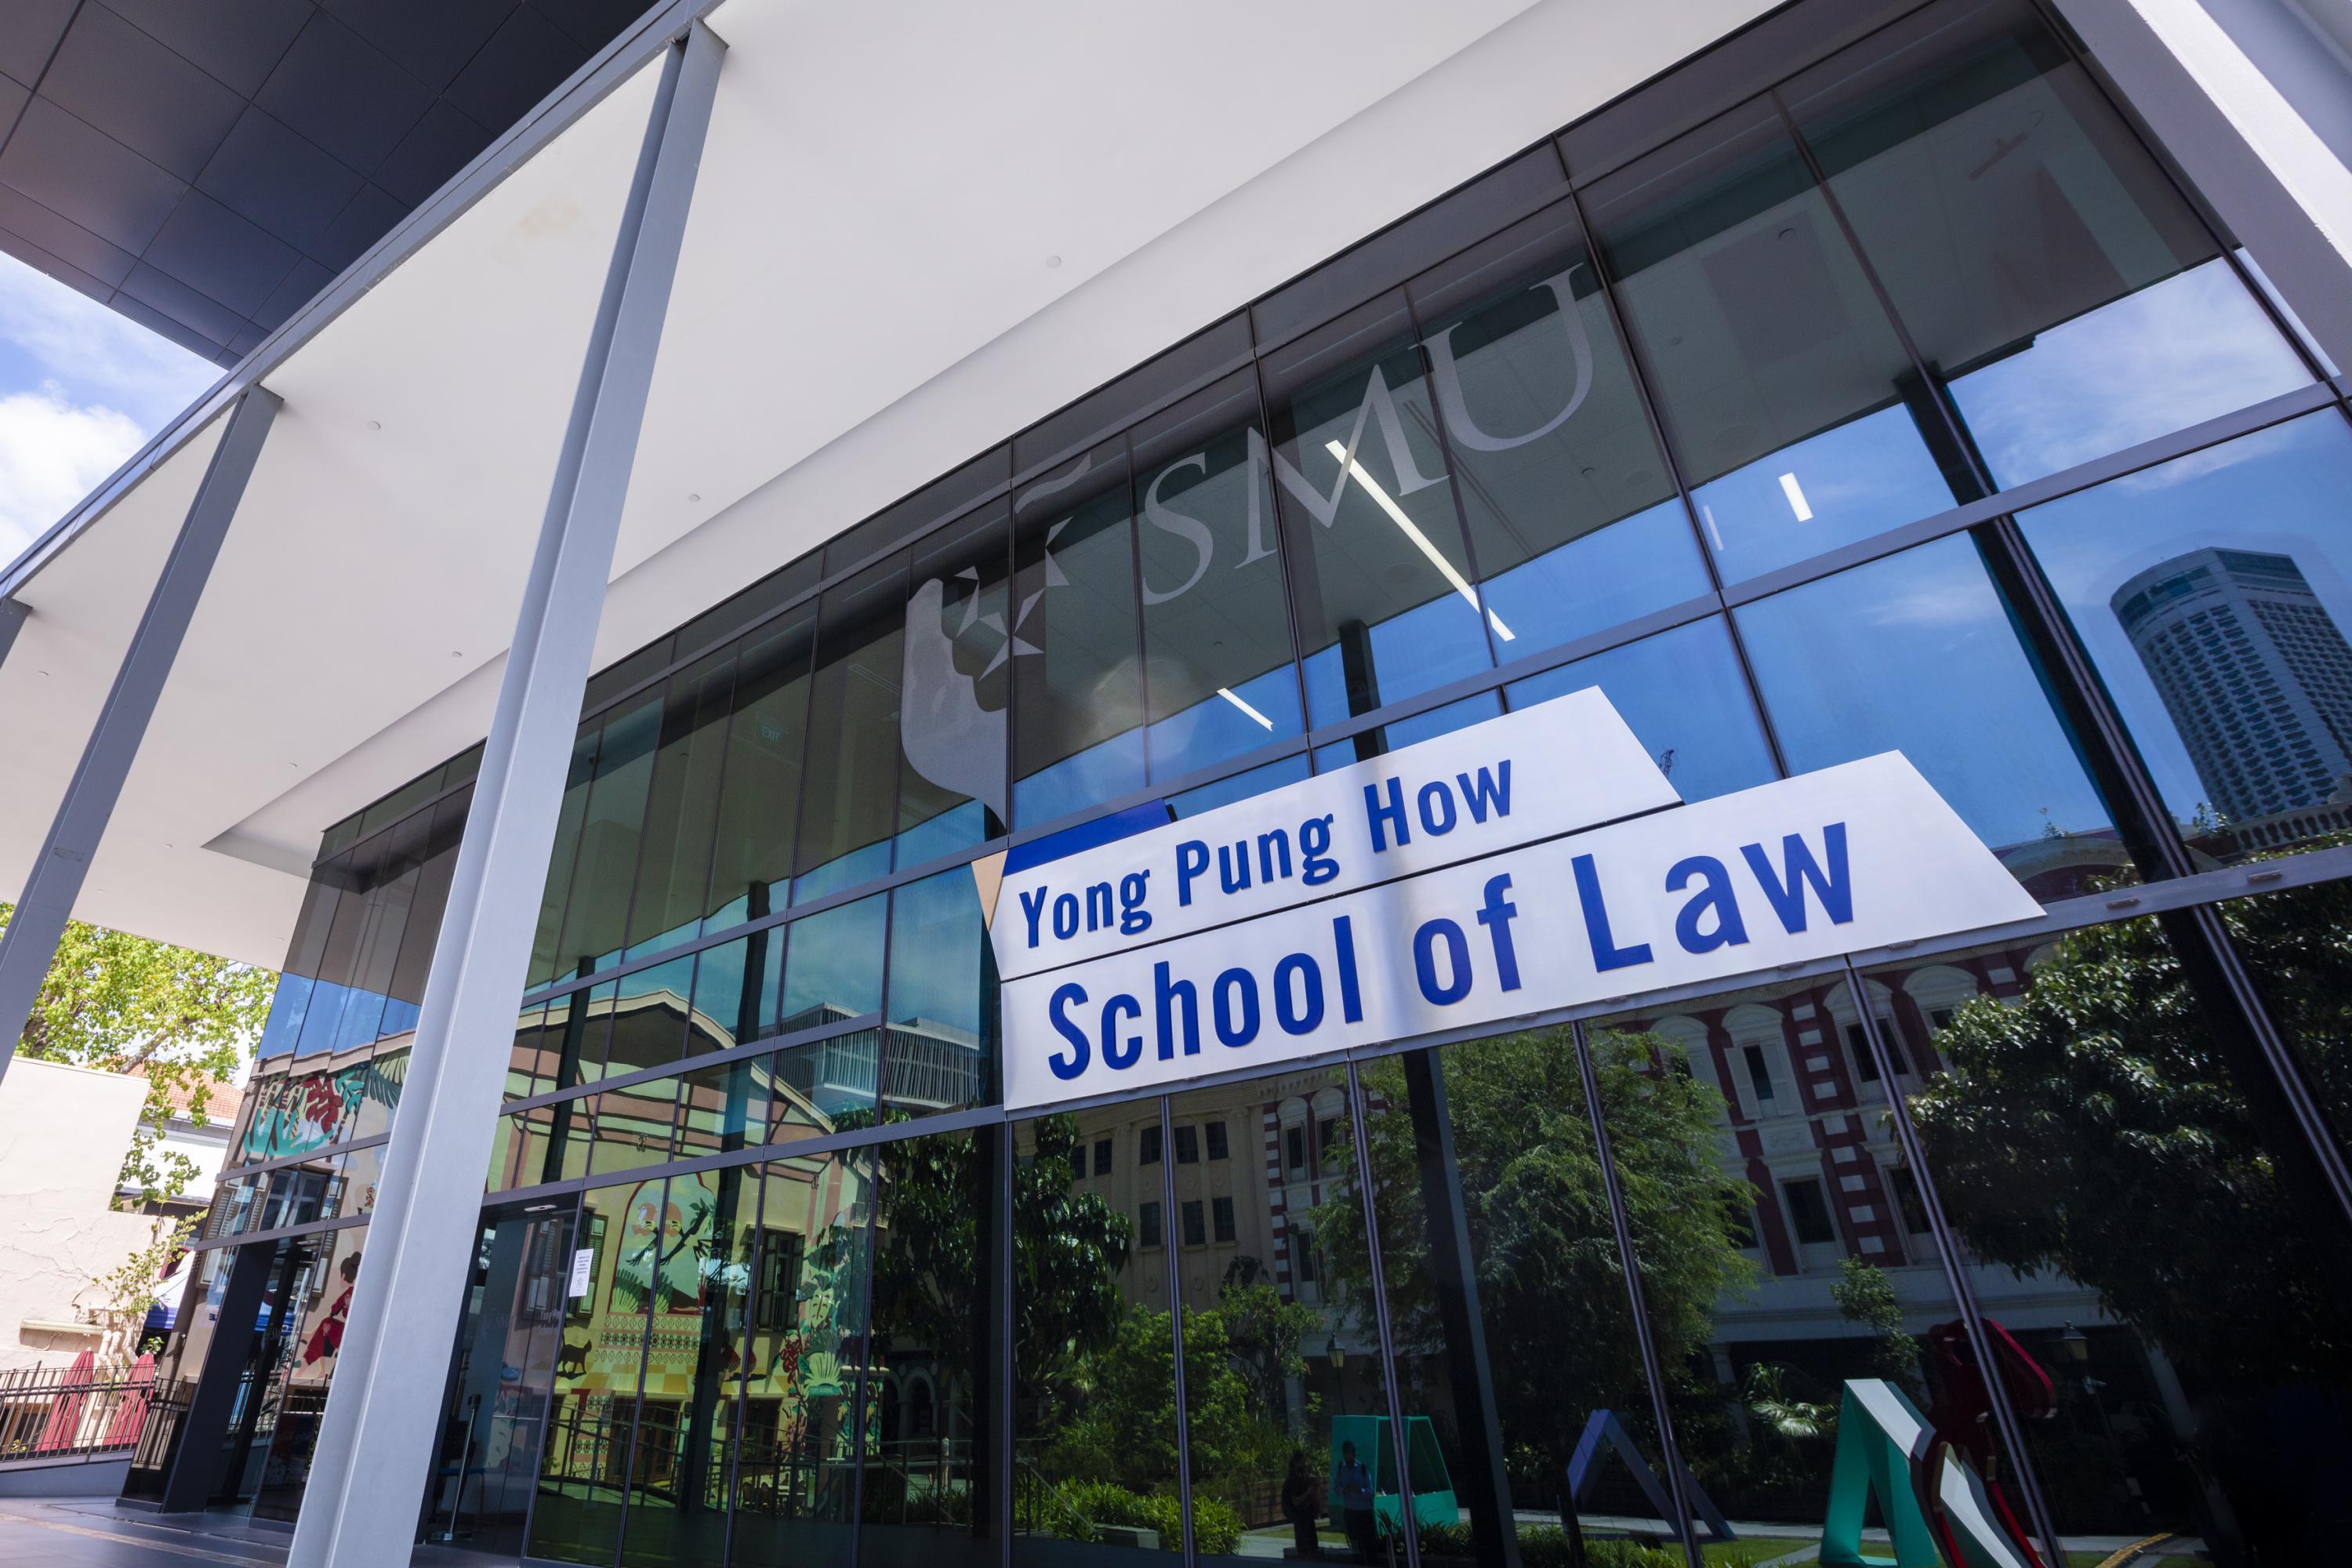 SMU officially renames its law school Yong Pung How School of Law SMU